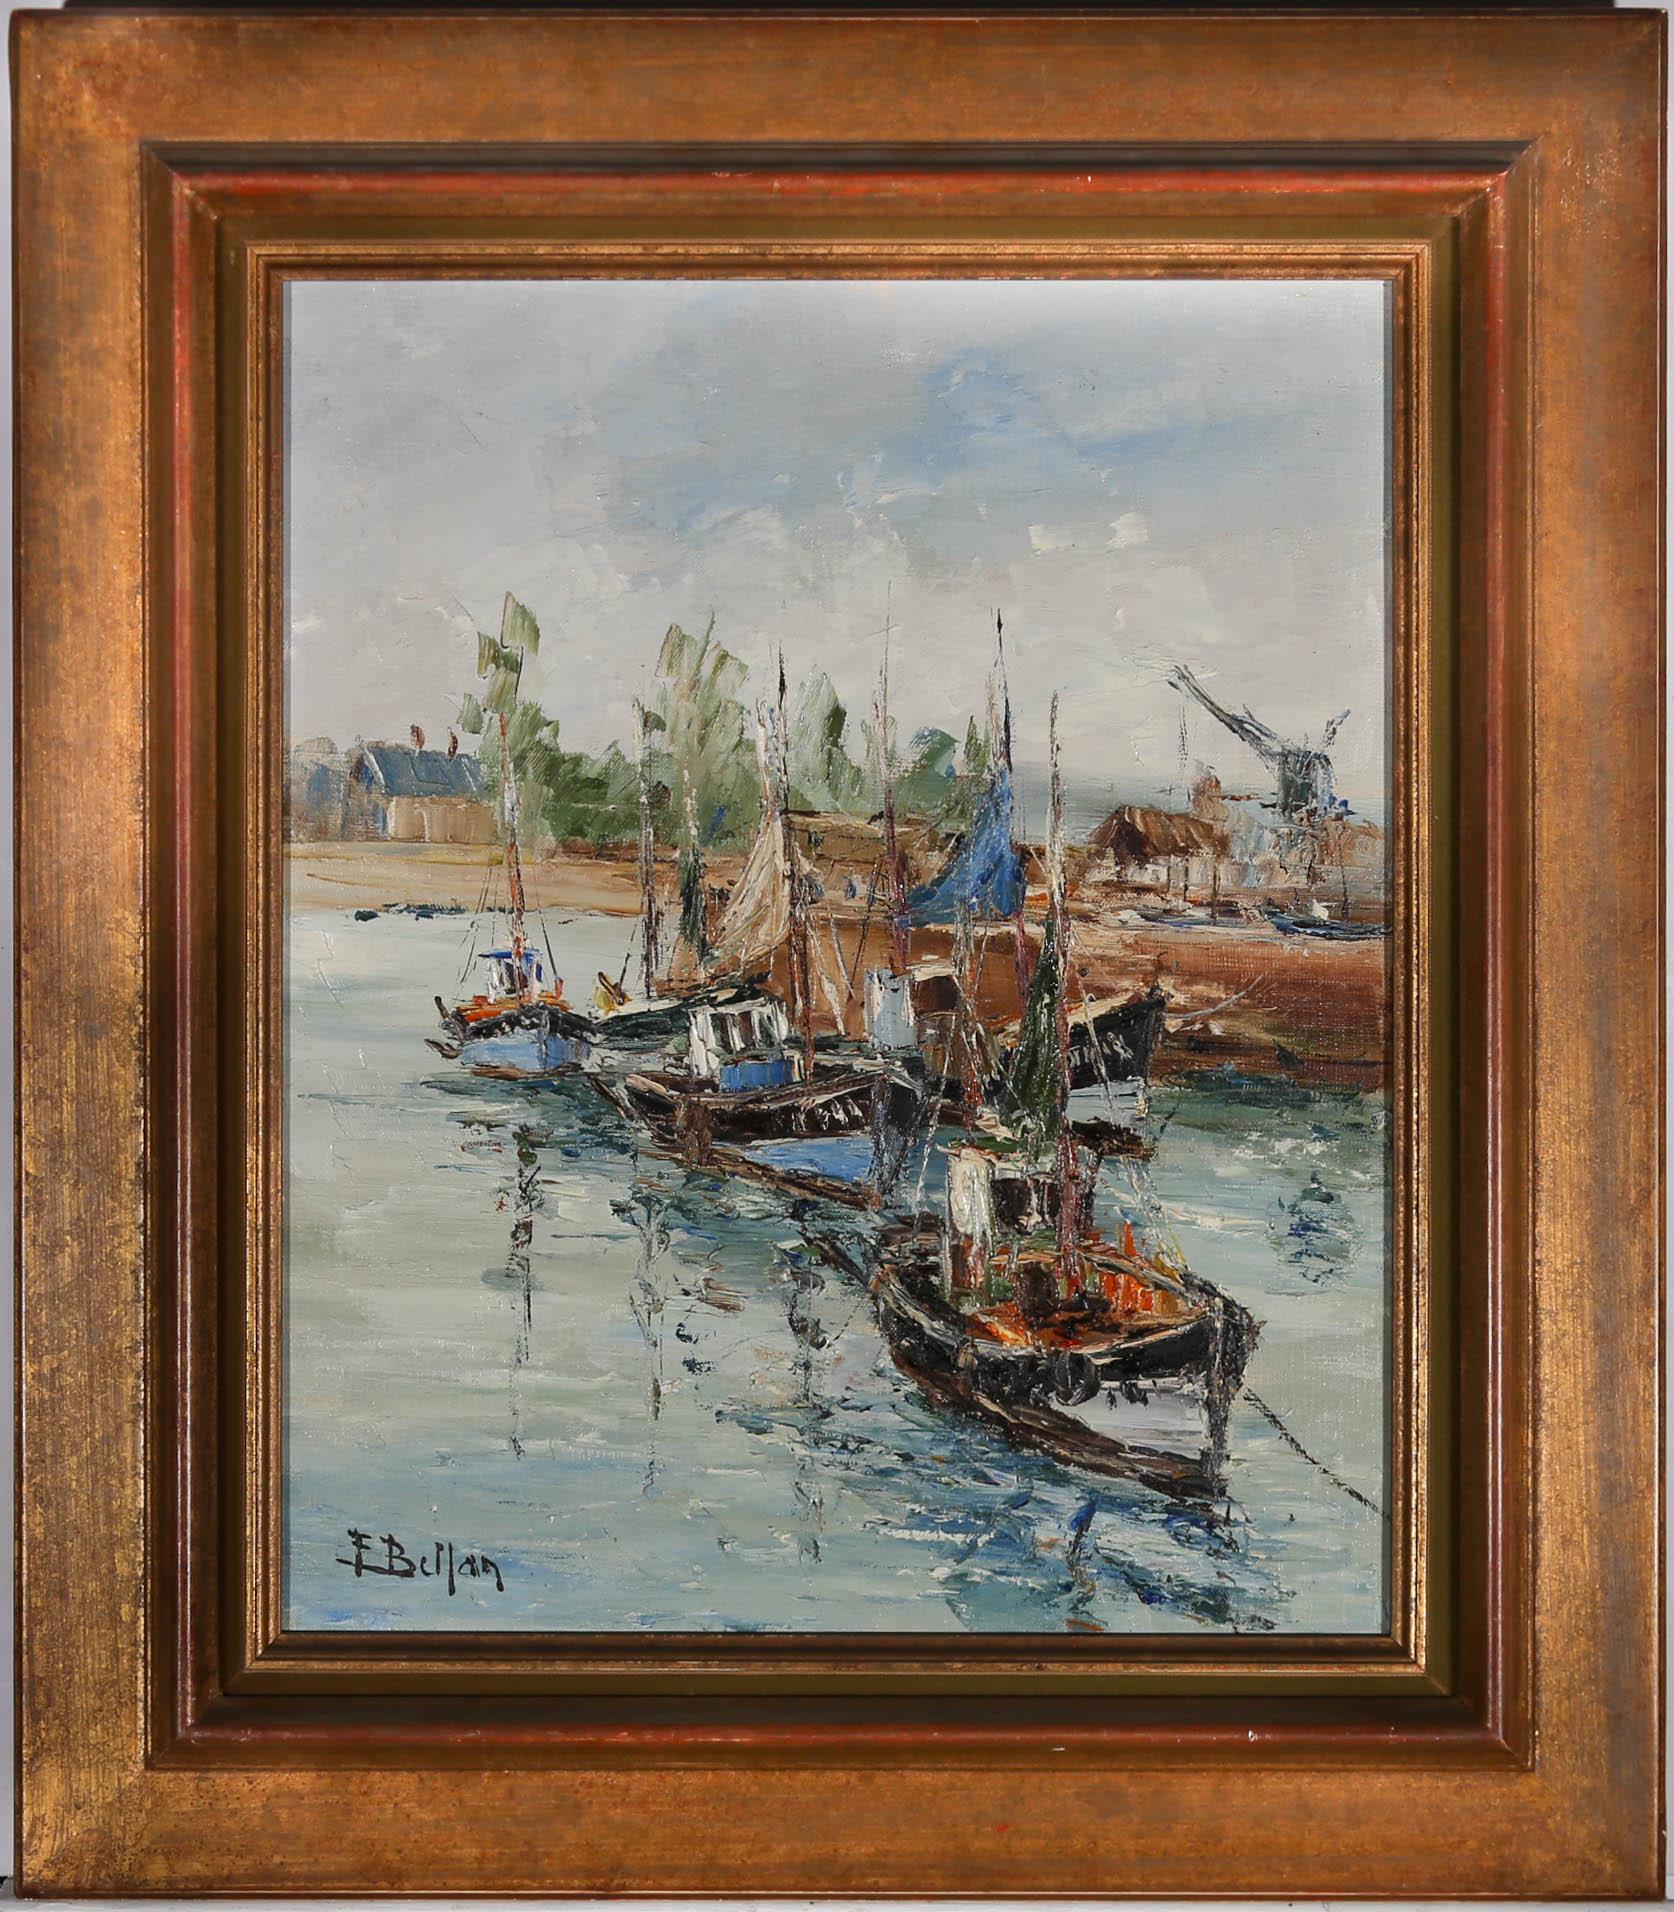 This wonderful impasto seascape by Etienne Bellan (1922-2000) depicting colourful fishing boats moored off a quay in the picture-perfect harbour location of Honfleur, Normandy. The painting is signed to the lower left-hand corner. Well presented in